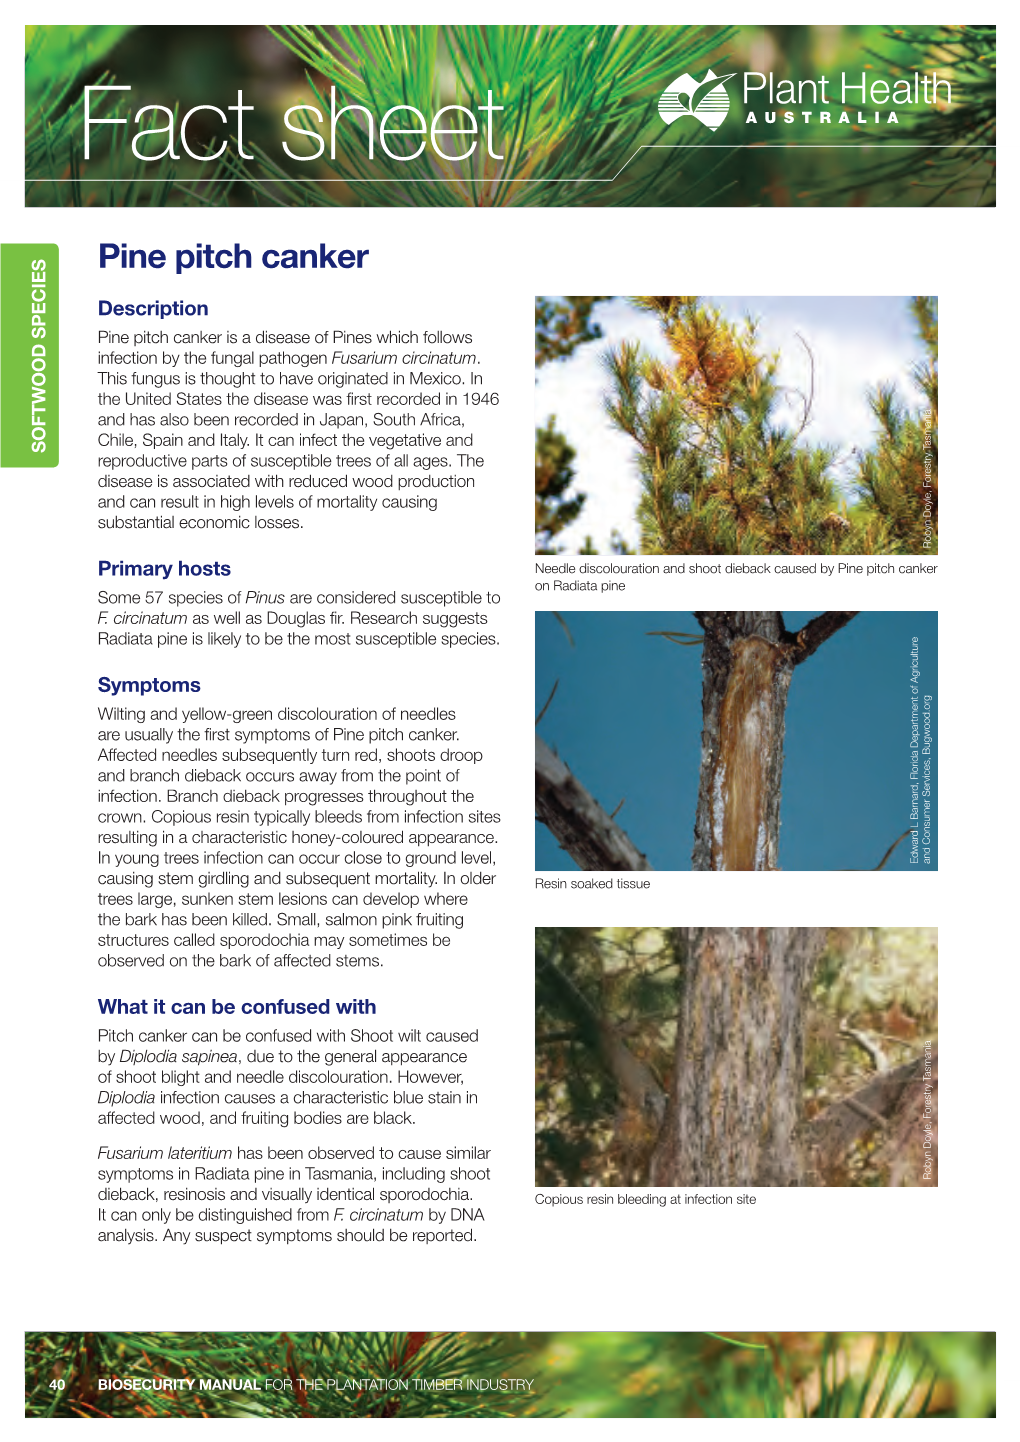 Pine Pitch Canker